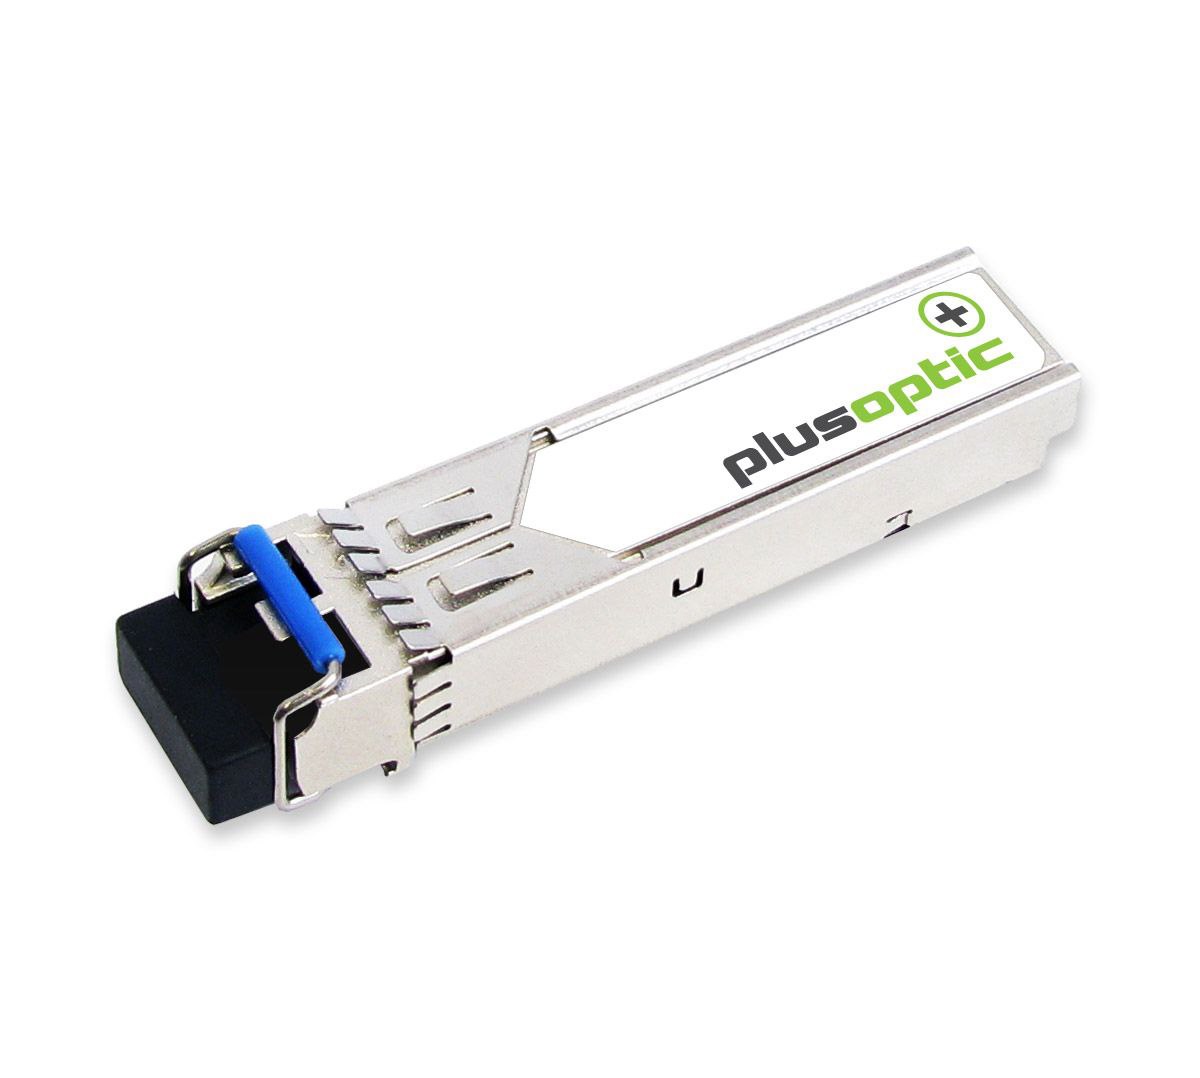 PlusOptic Extreme Compatible 10G, BiDi SFP+, TX1330nm / RX1270nm, 10KM Transceiver, LC Connector For SMF With Dom | PlusOptic Bisfp+-D3-10-Exti